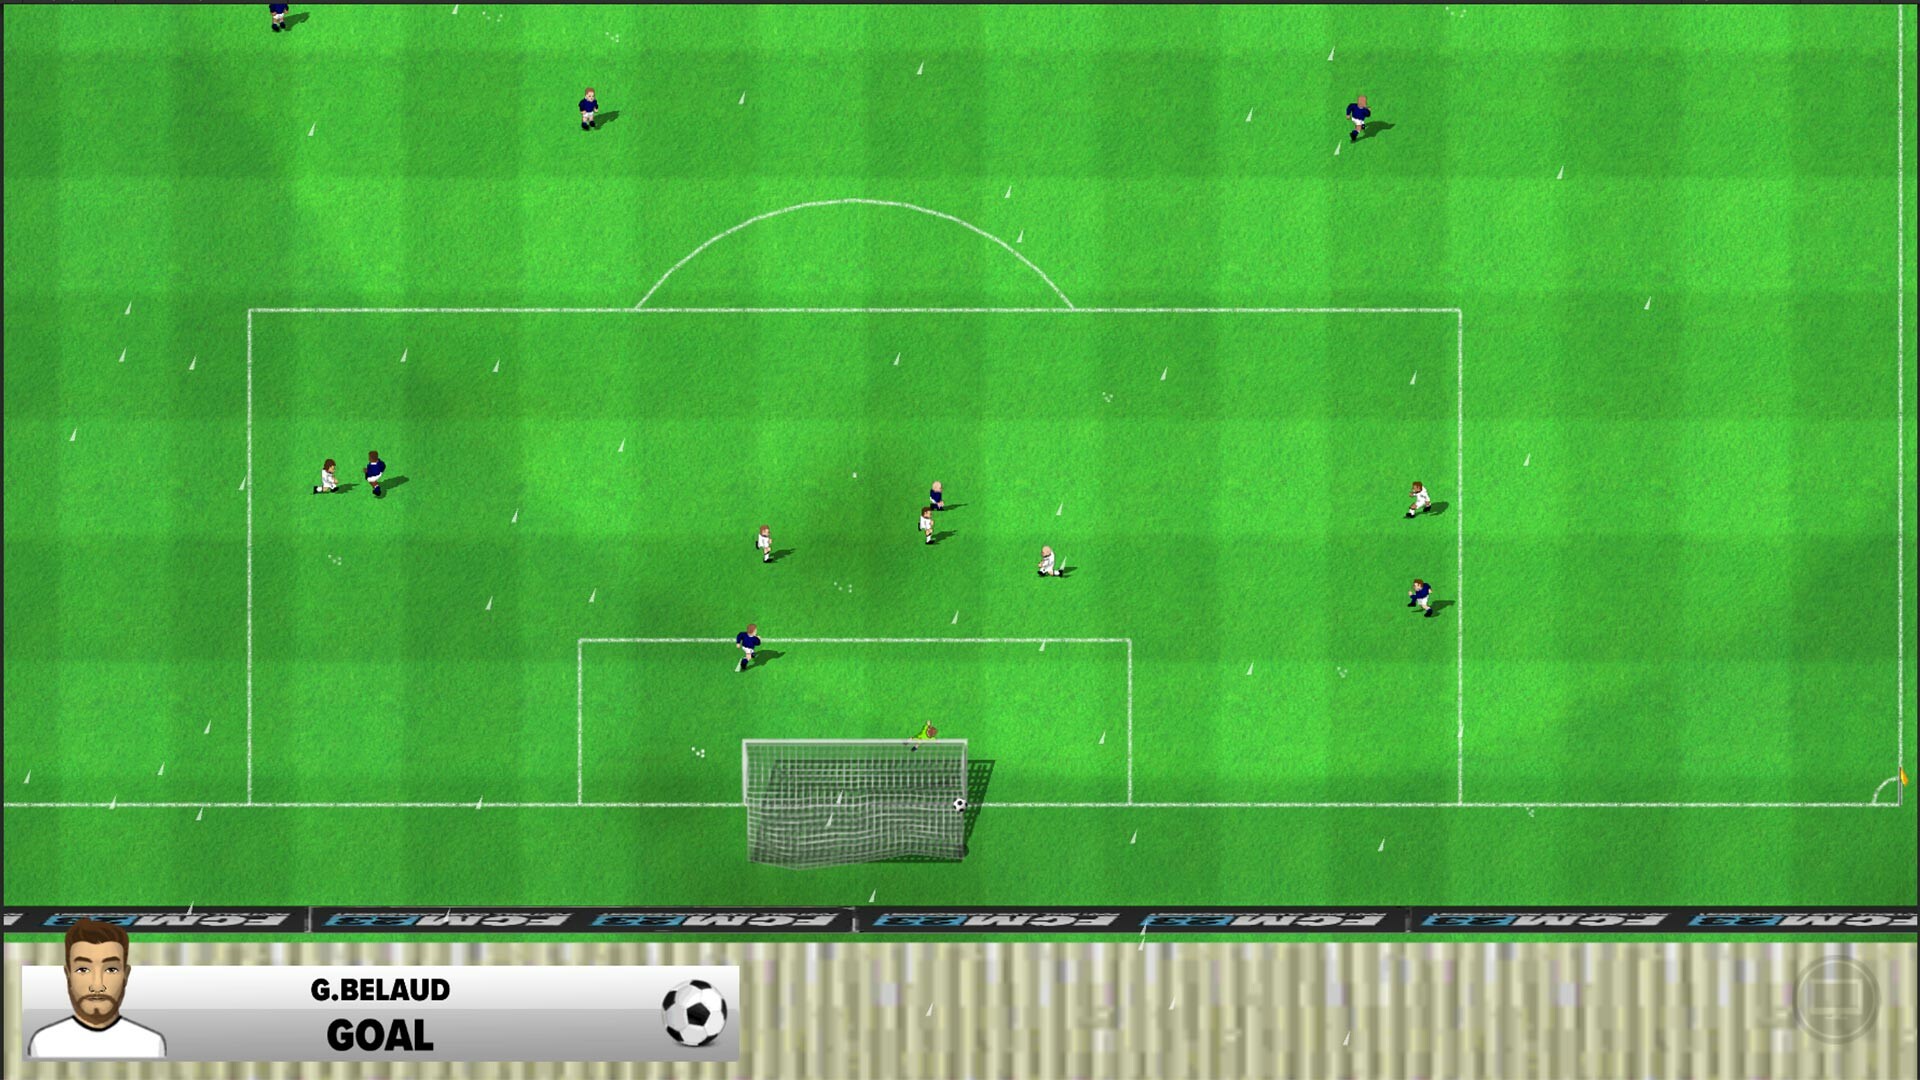 GOAL! The Club Manager, PC Steam Game